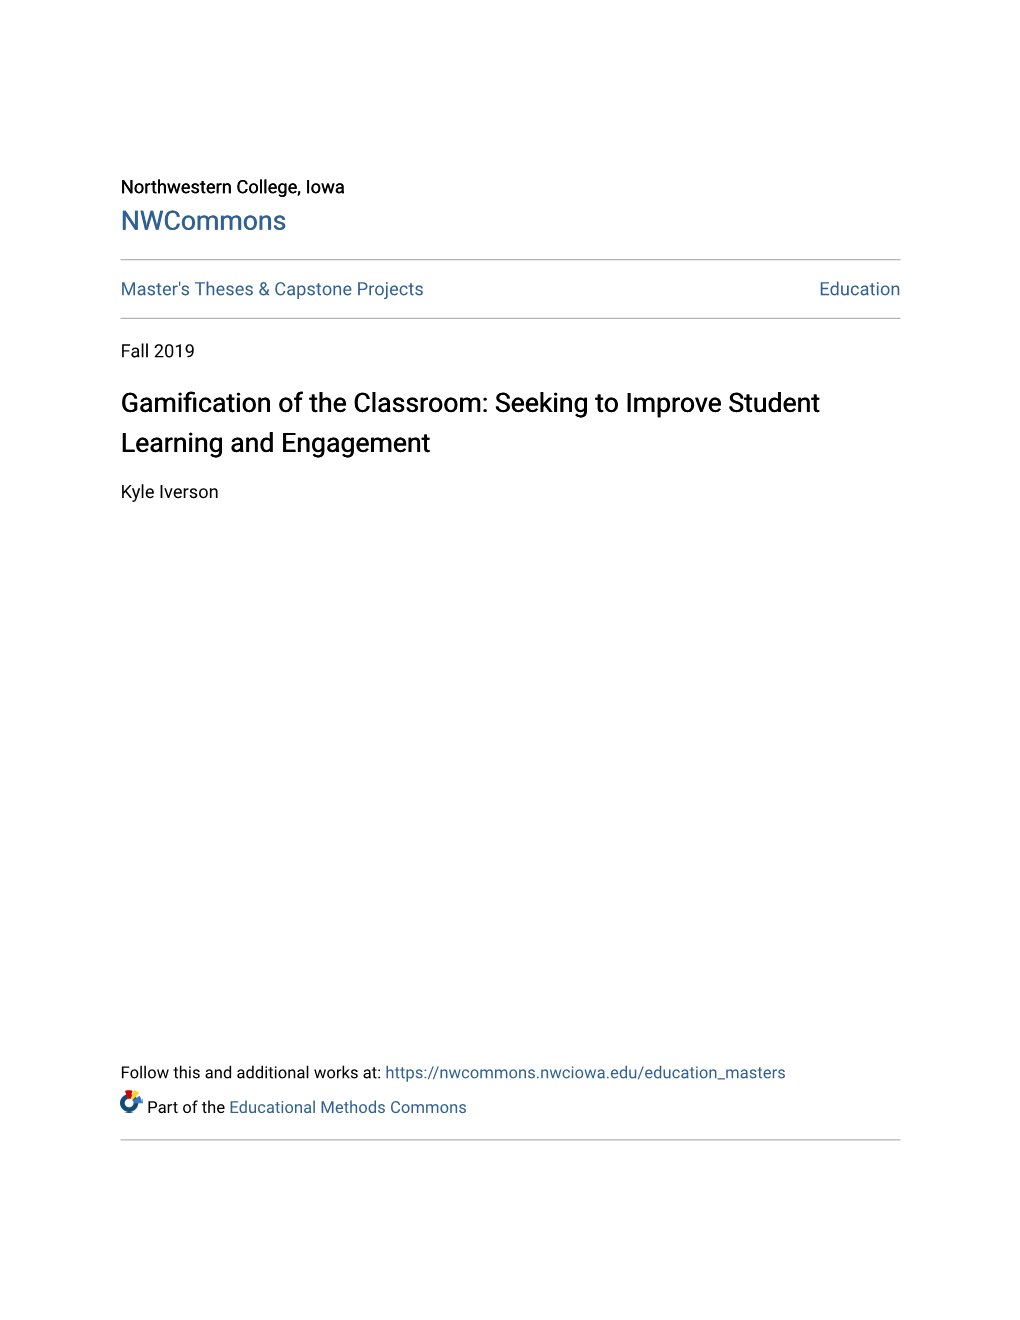 Gamification of the Classroom: Seeking to Improve Student Learning and Engagement